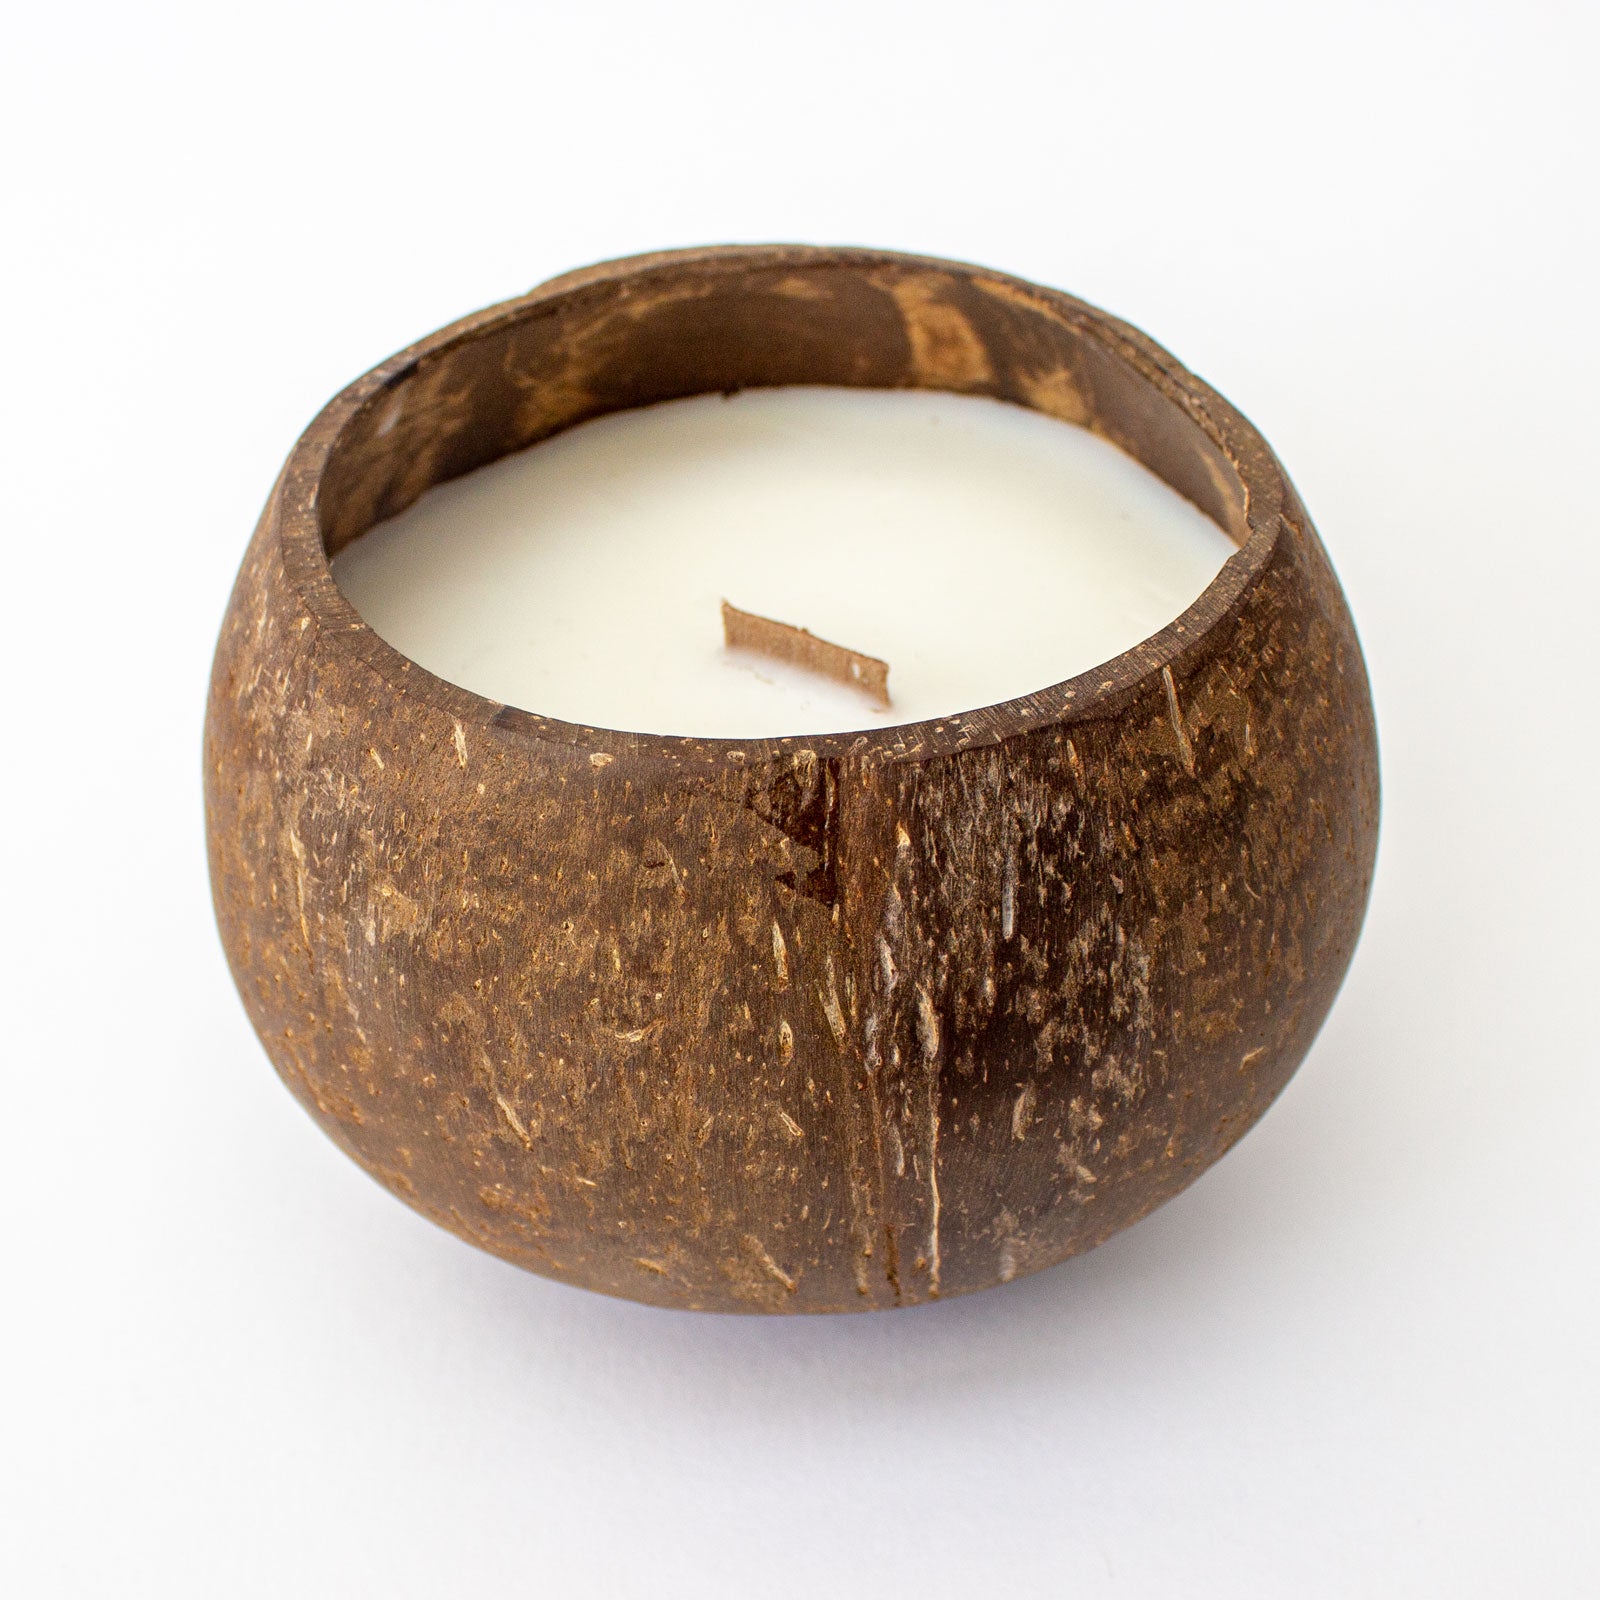 No.1 NURSE - Toasted Coconut Bowl Candle – Soy Wax - Gift Present